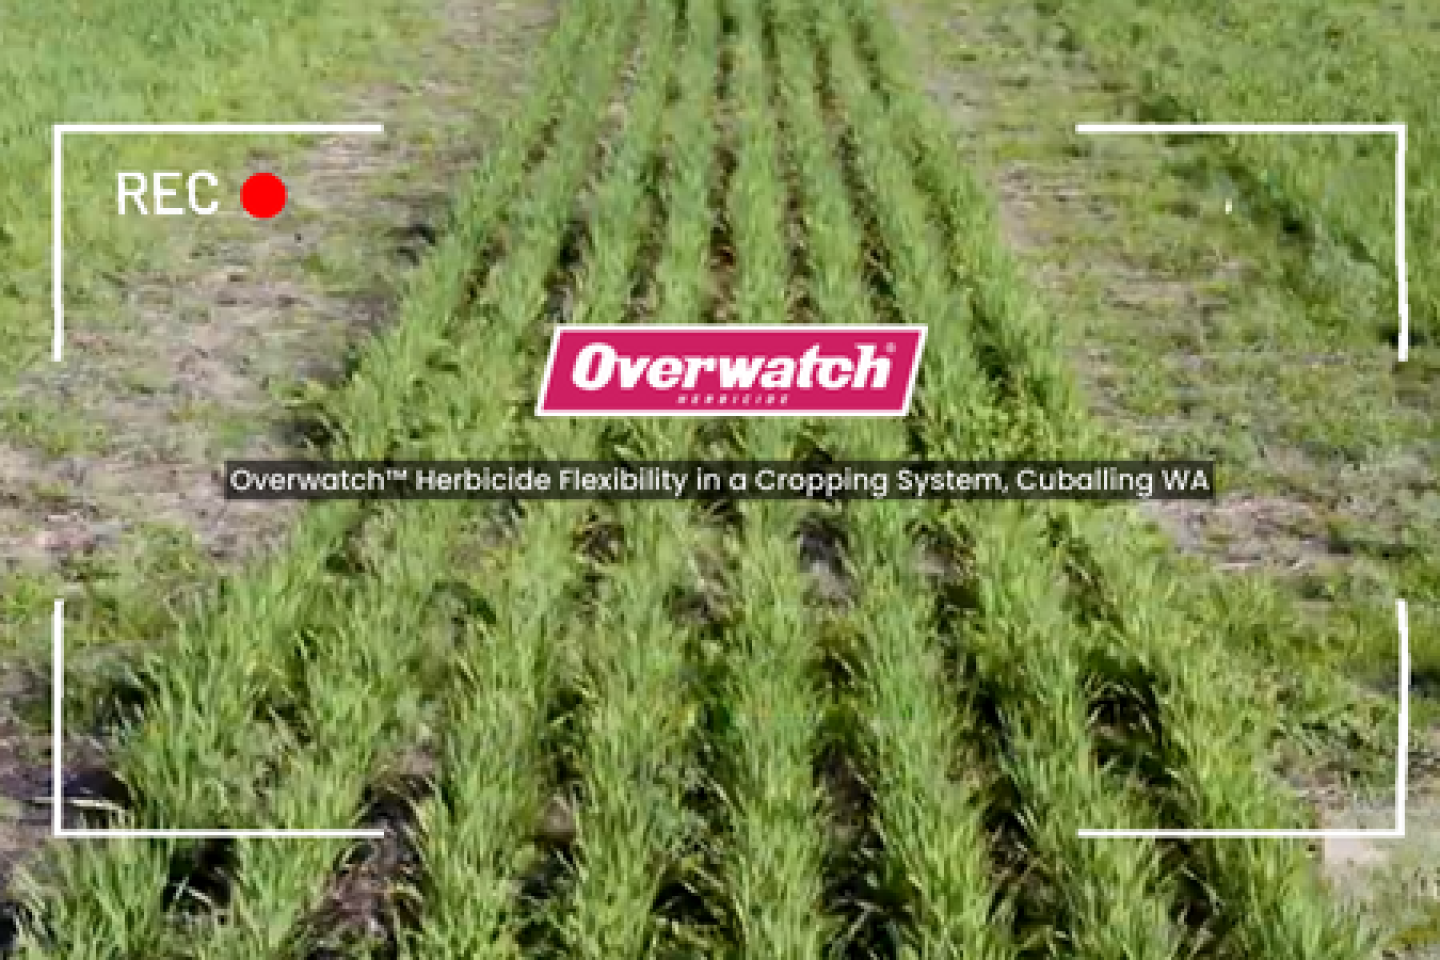 Overwatch™ Herbicide Flexibility in a Cropping System, Cuballing WA